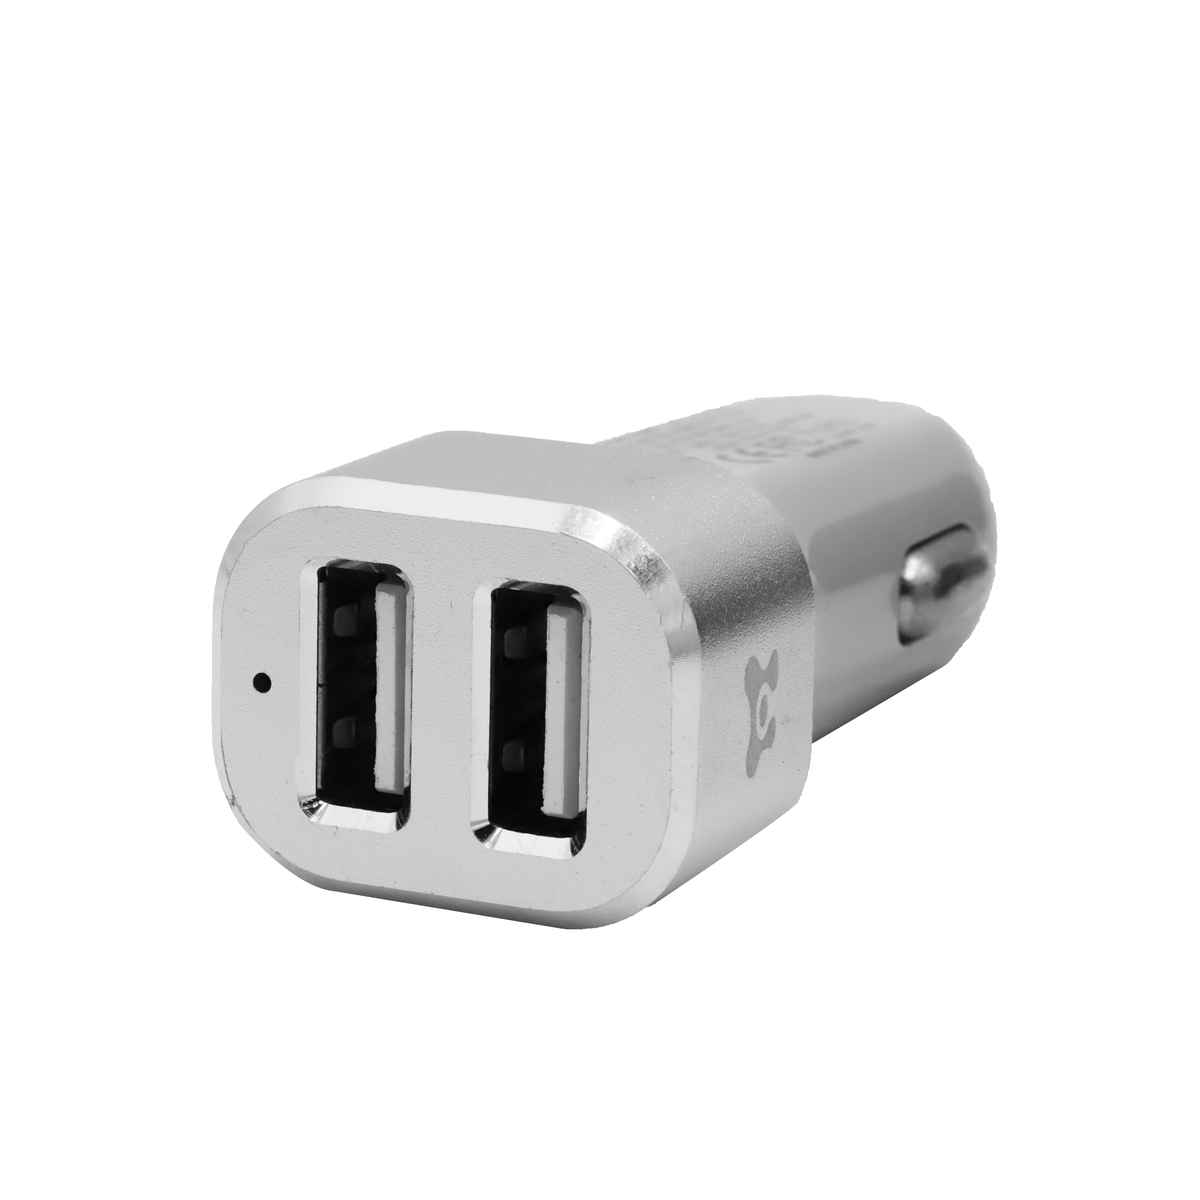 3. LM-395103 Dual USB Car Charger Bulk Purchase and Corporate purchase from China Union Power -Description-